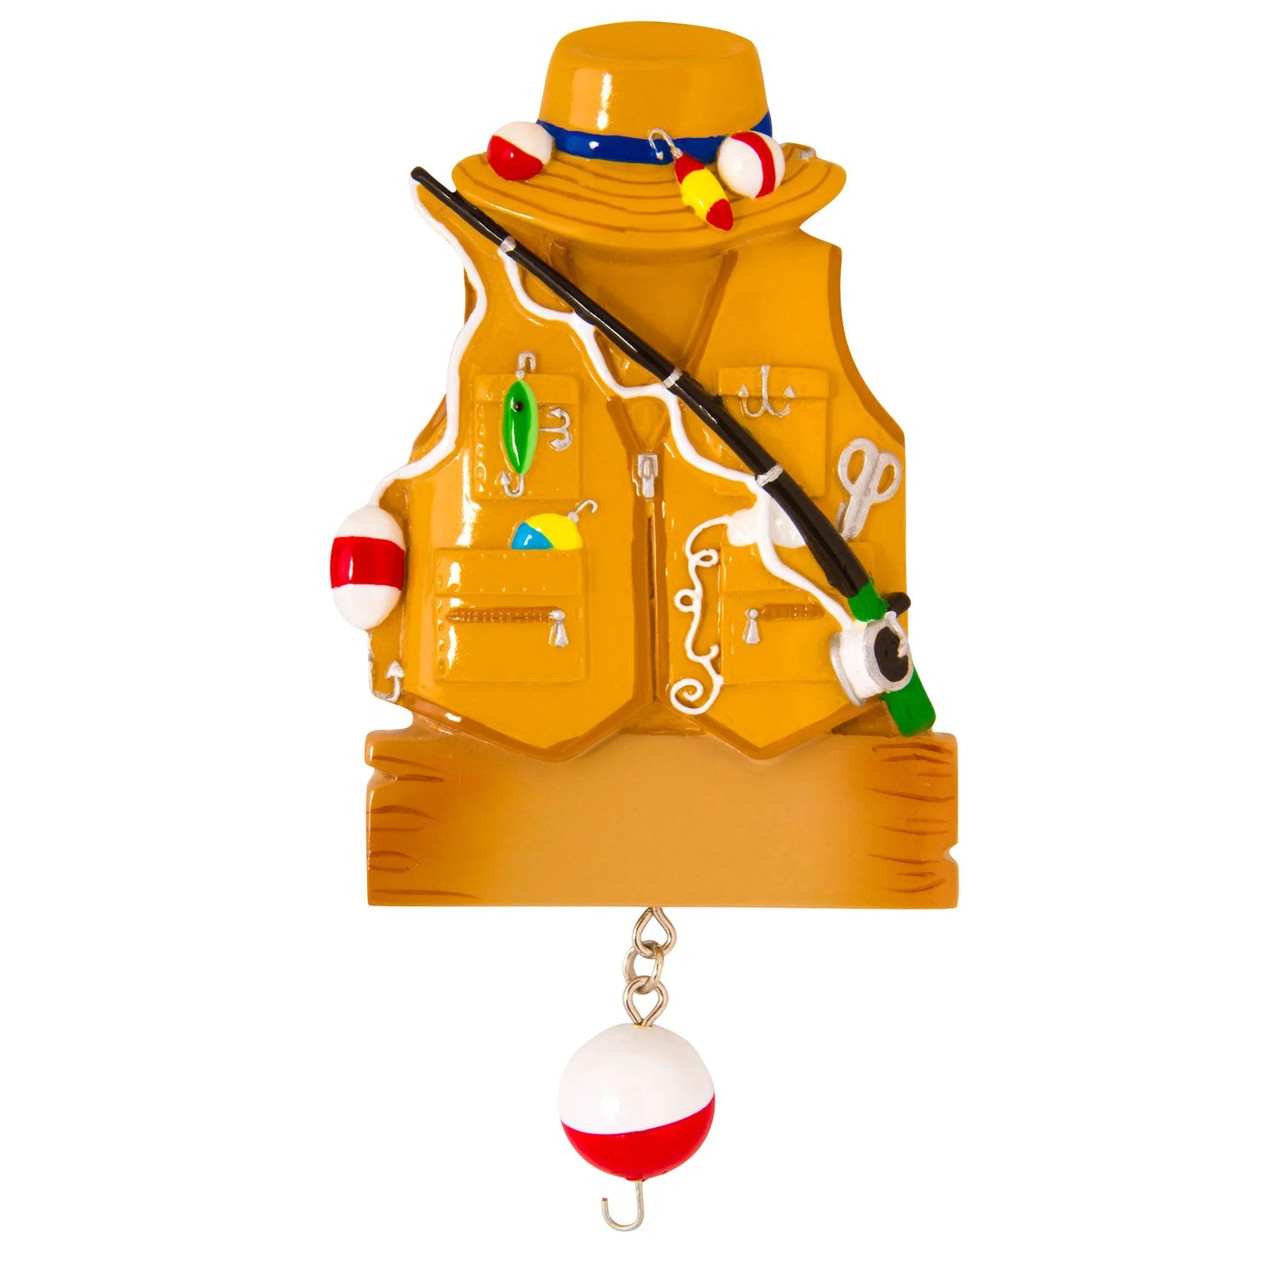 https://cdn11.bigcommerce.com/s-c9a80/images/stencil/1280x1280/products/18181/68759/PX-OR1620_Fishing_Vest_Personalized_Ornament__50313.1701277562.jpg?c=2